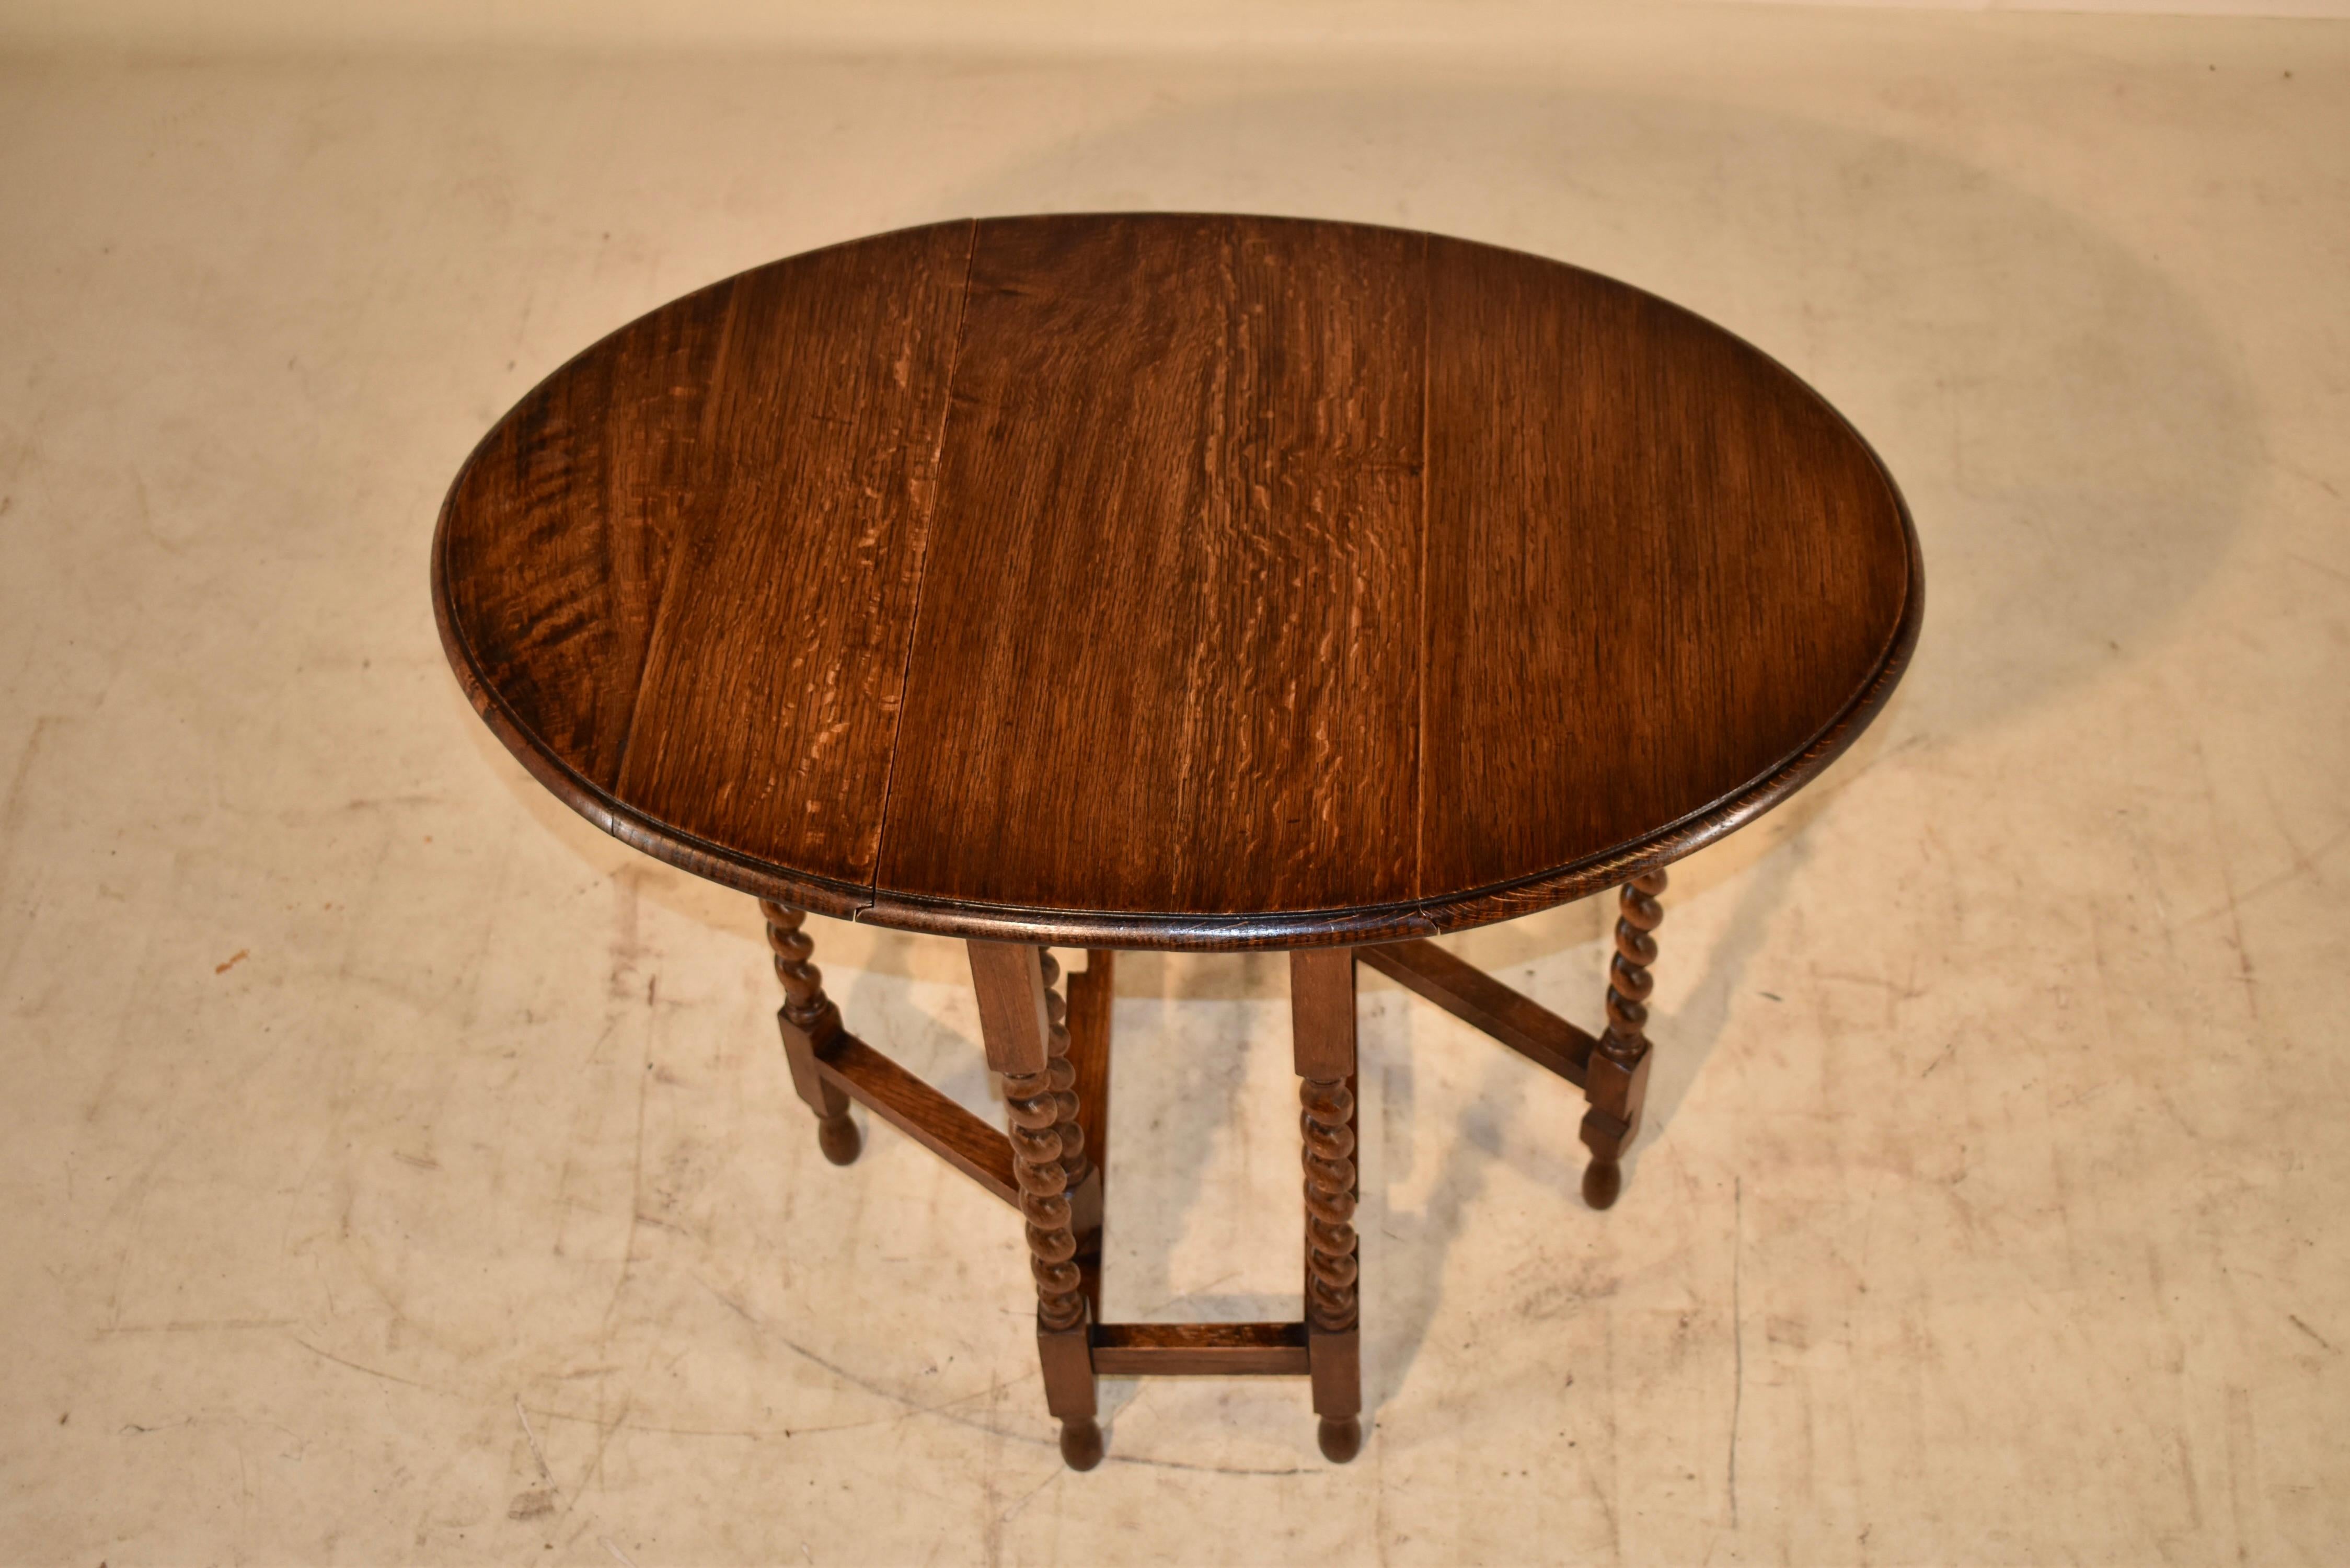 Early 20th Century English Oak Gate Leg Table, C. 1900 For Sale